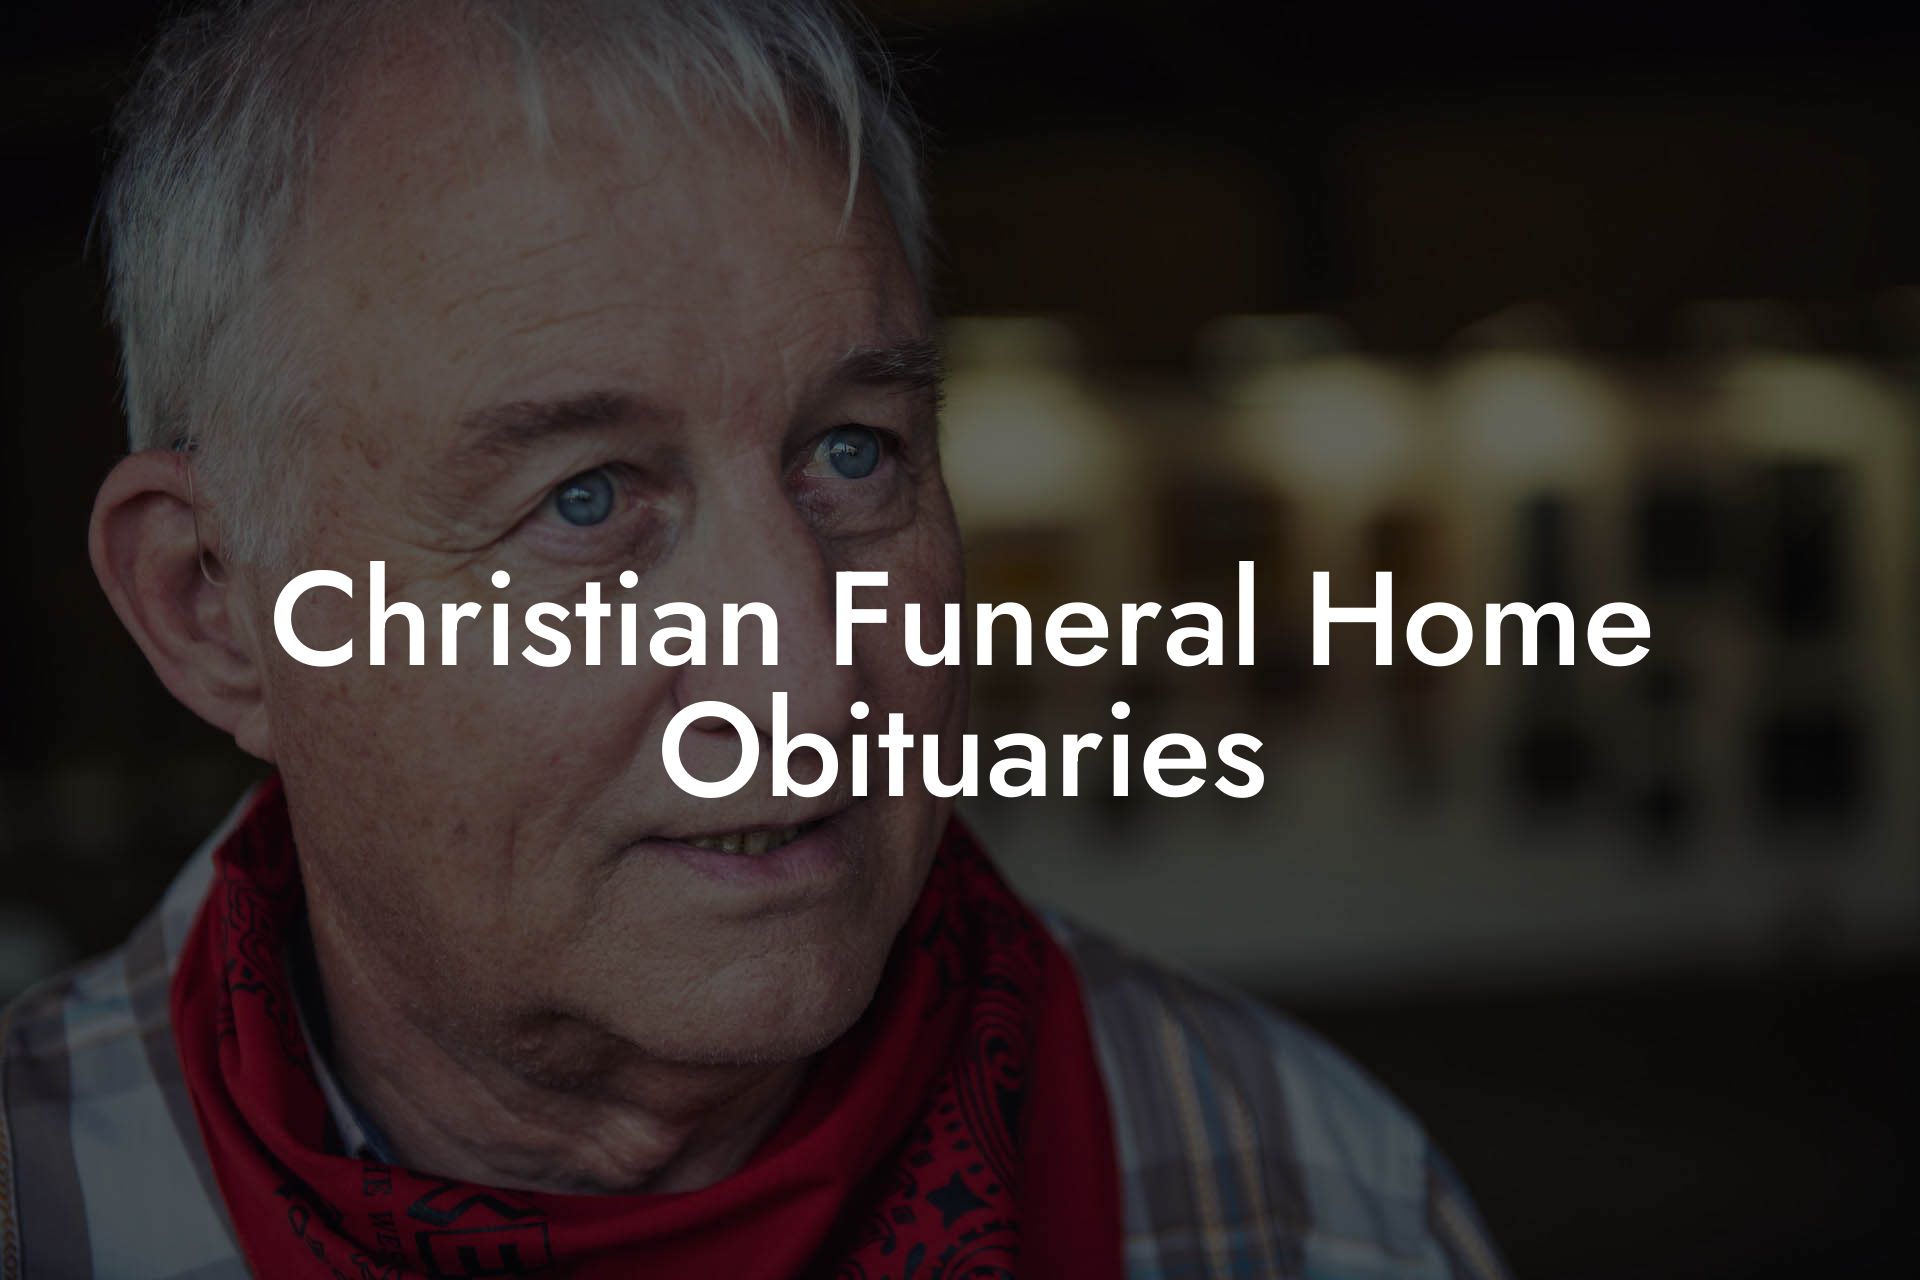 Christian Funeral Home Obituaries